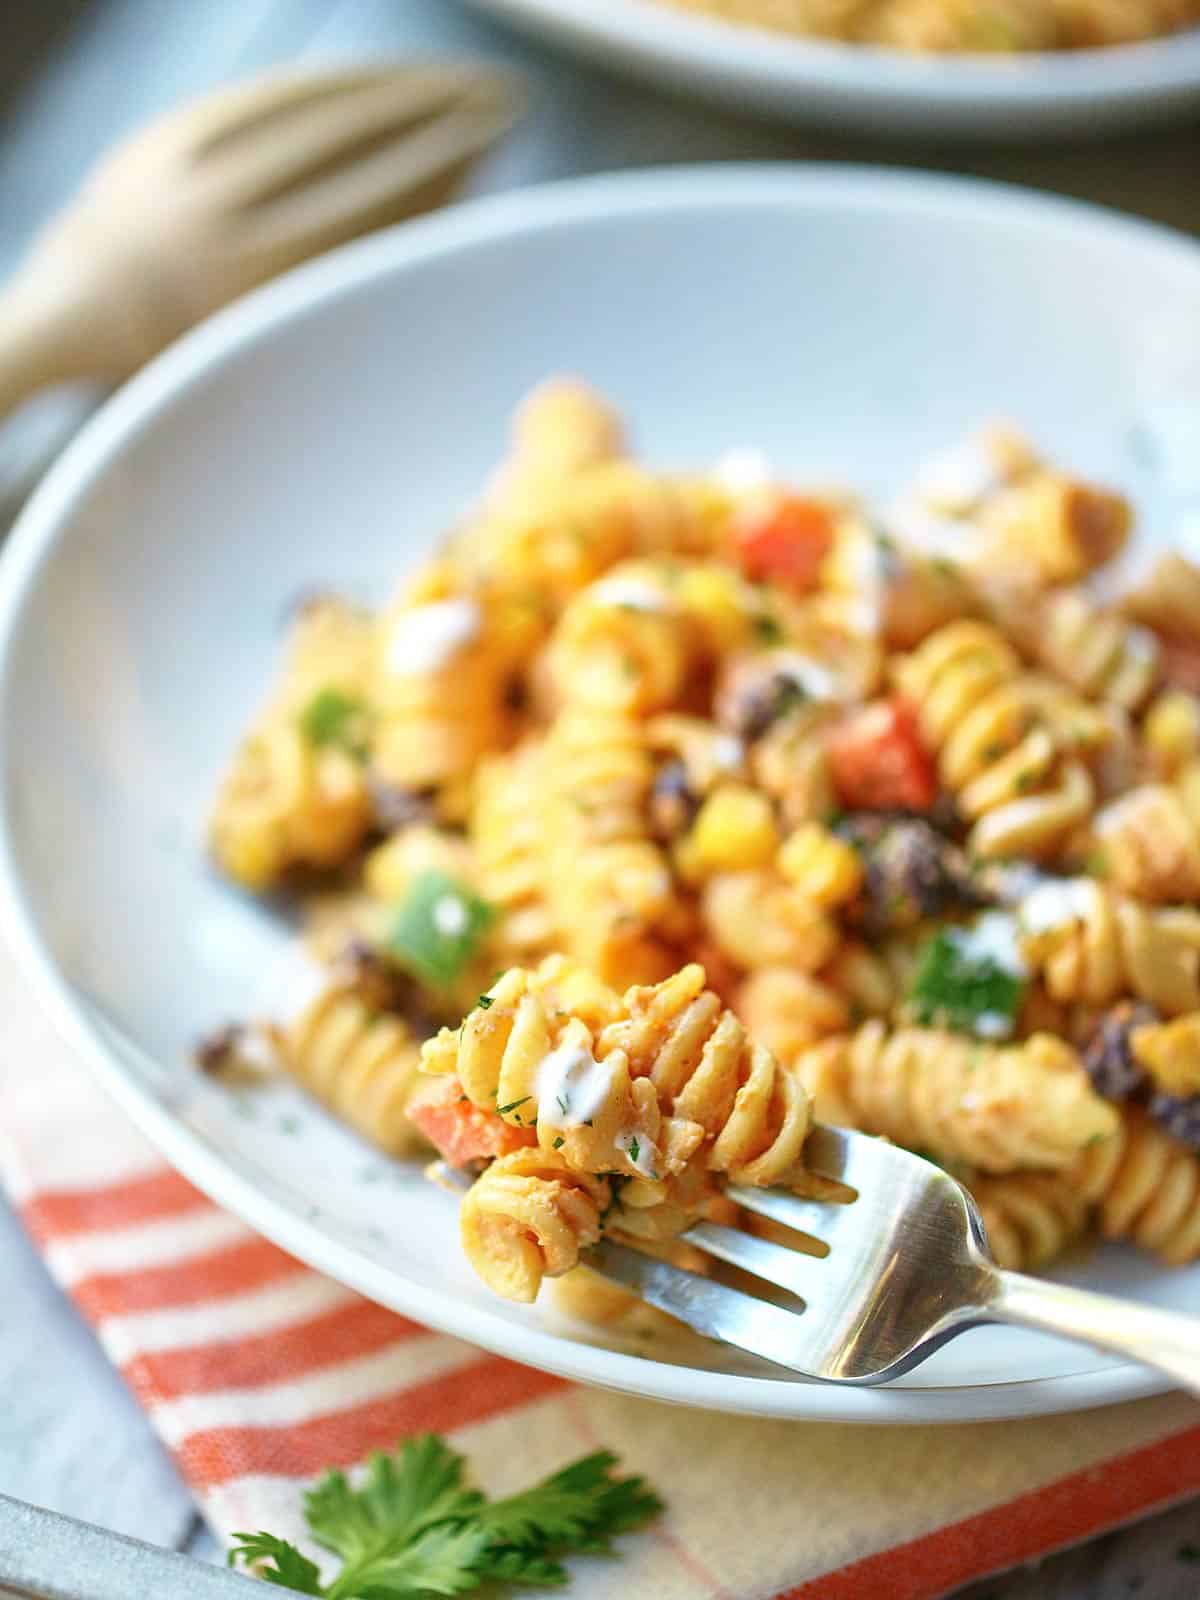 This Mexican Pasta Salad needs to make an appearance at your next grill out. A fun textured pasta + fresh crunchy veggies + black beans + a kick butt sauce! showmetheyummy.com #mexicanfood #pasta #salad #mexicanpastasalad #pastasalad #grilling #sidedish #vegetarian